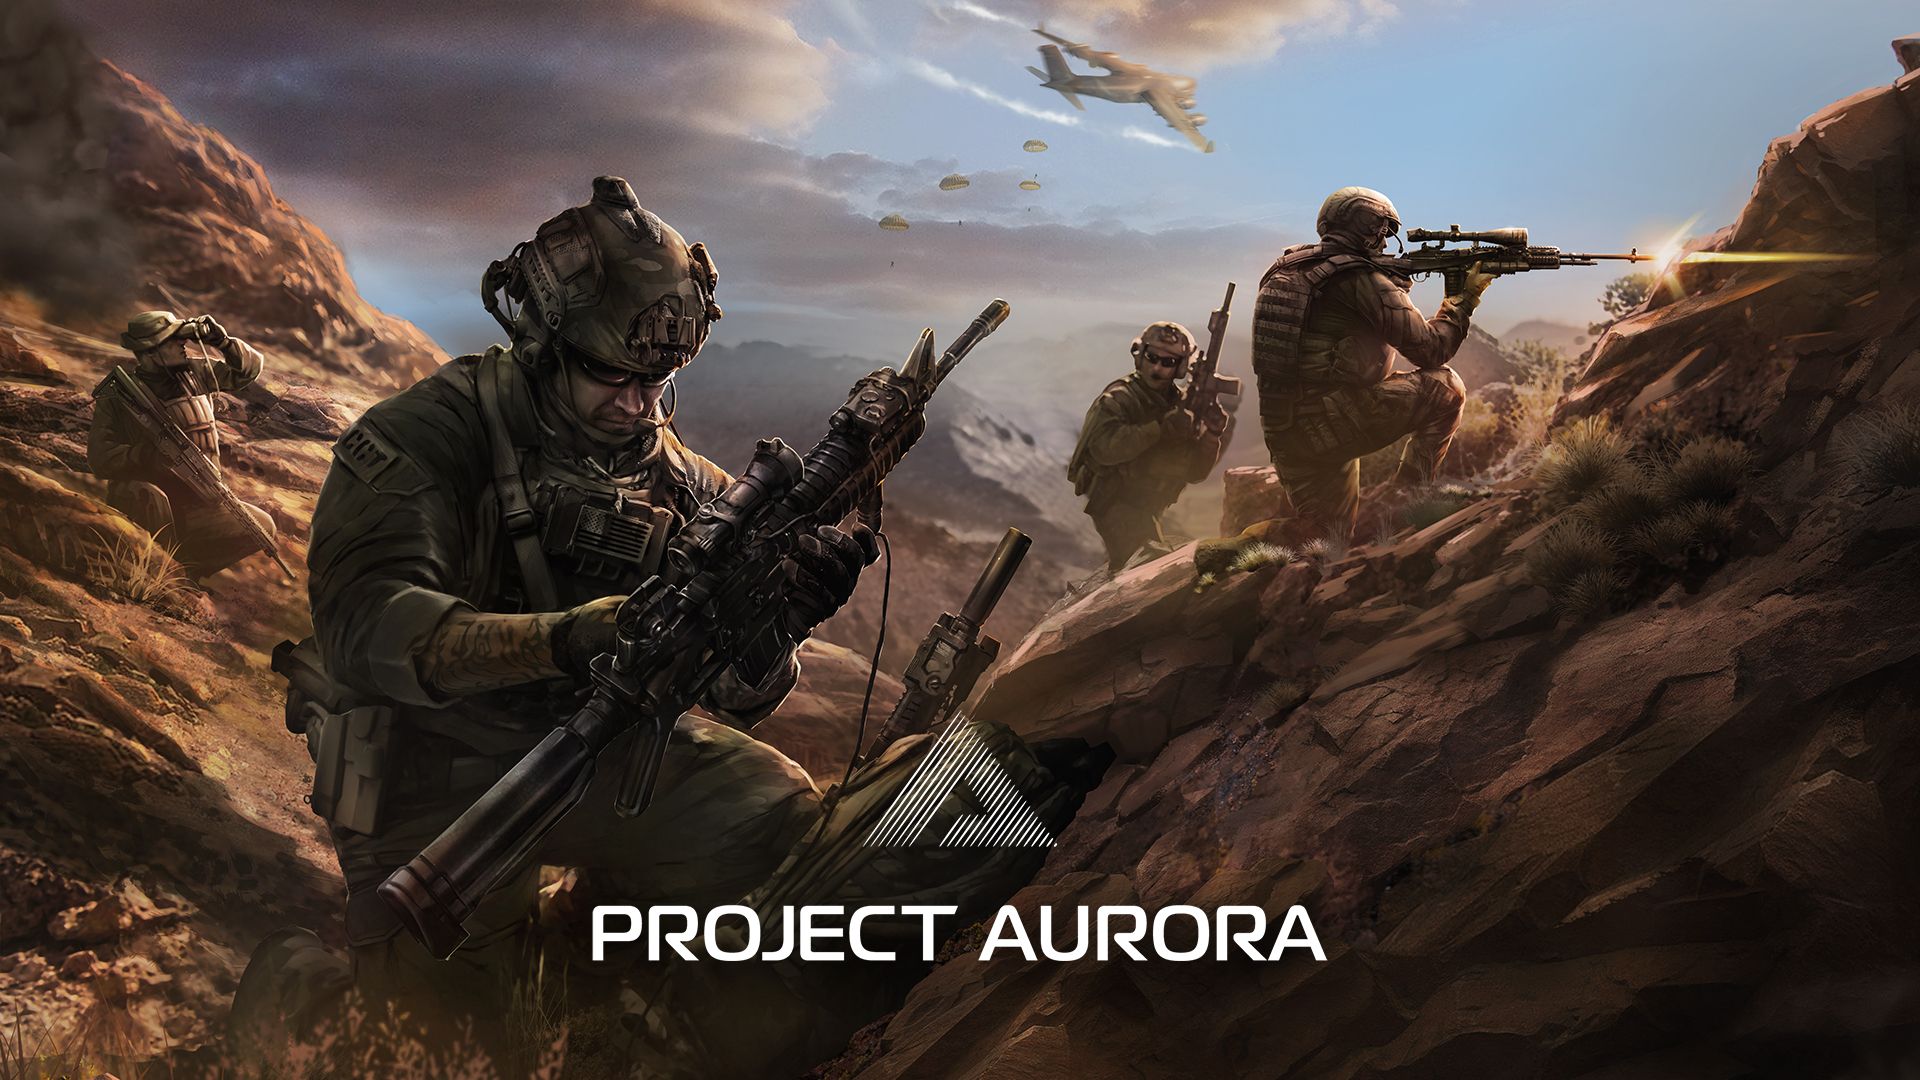 Warzone Mobile™ on X: Warzone Mobile Closed Beta Reveal  No More Alpha    / X